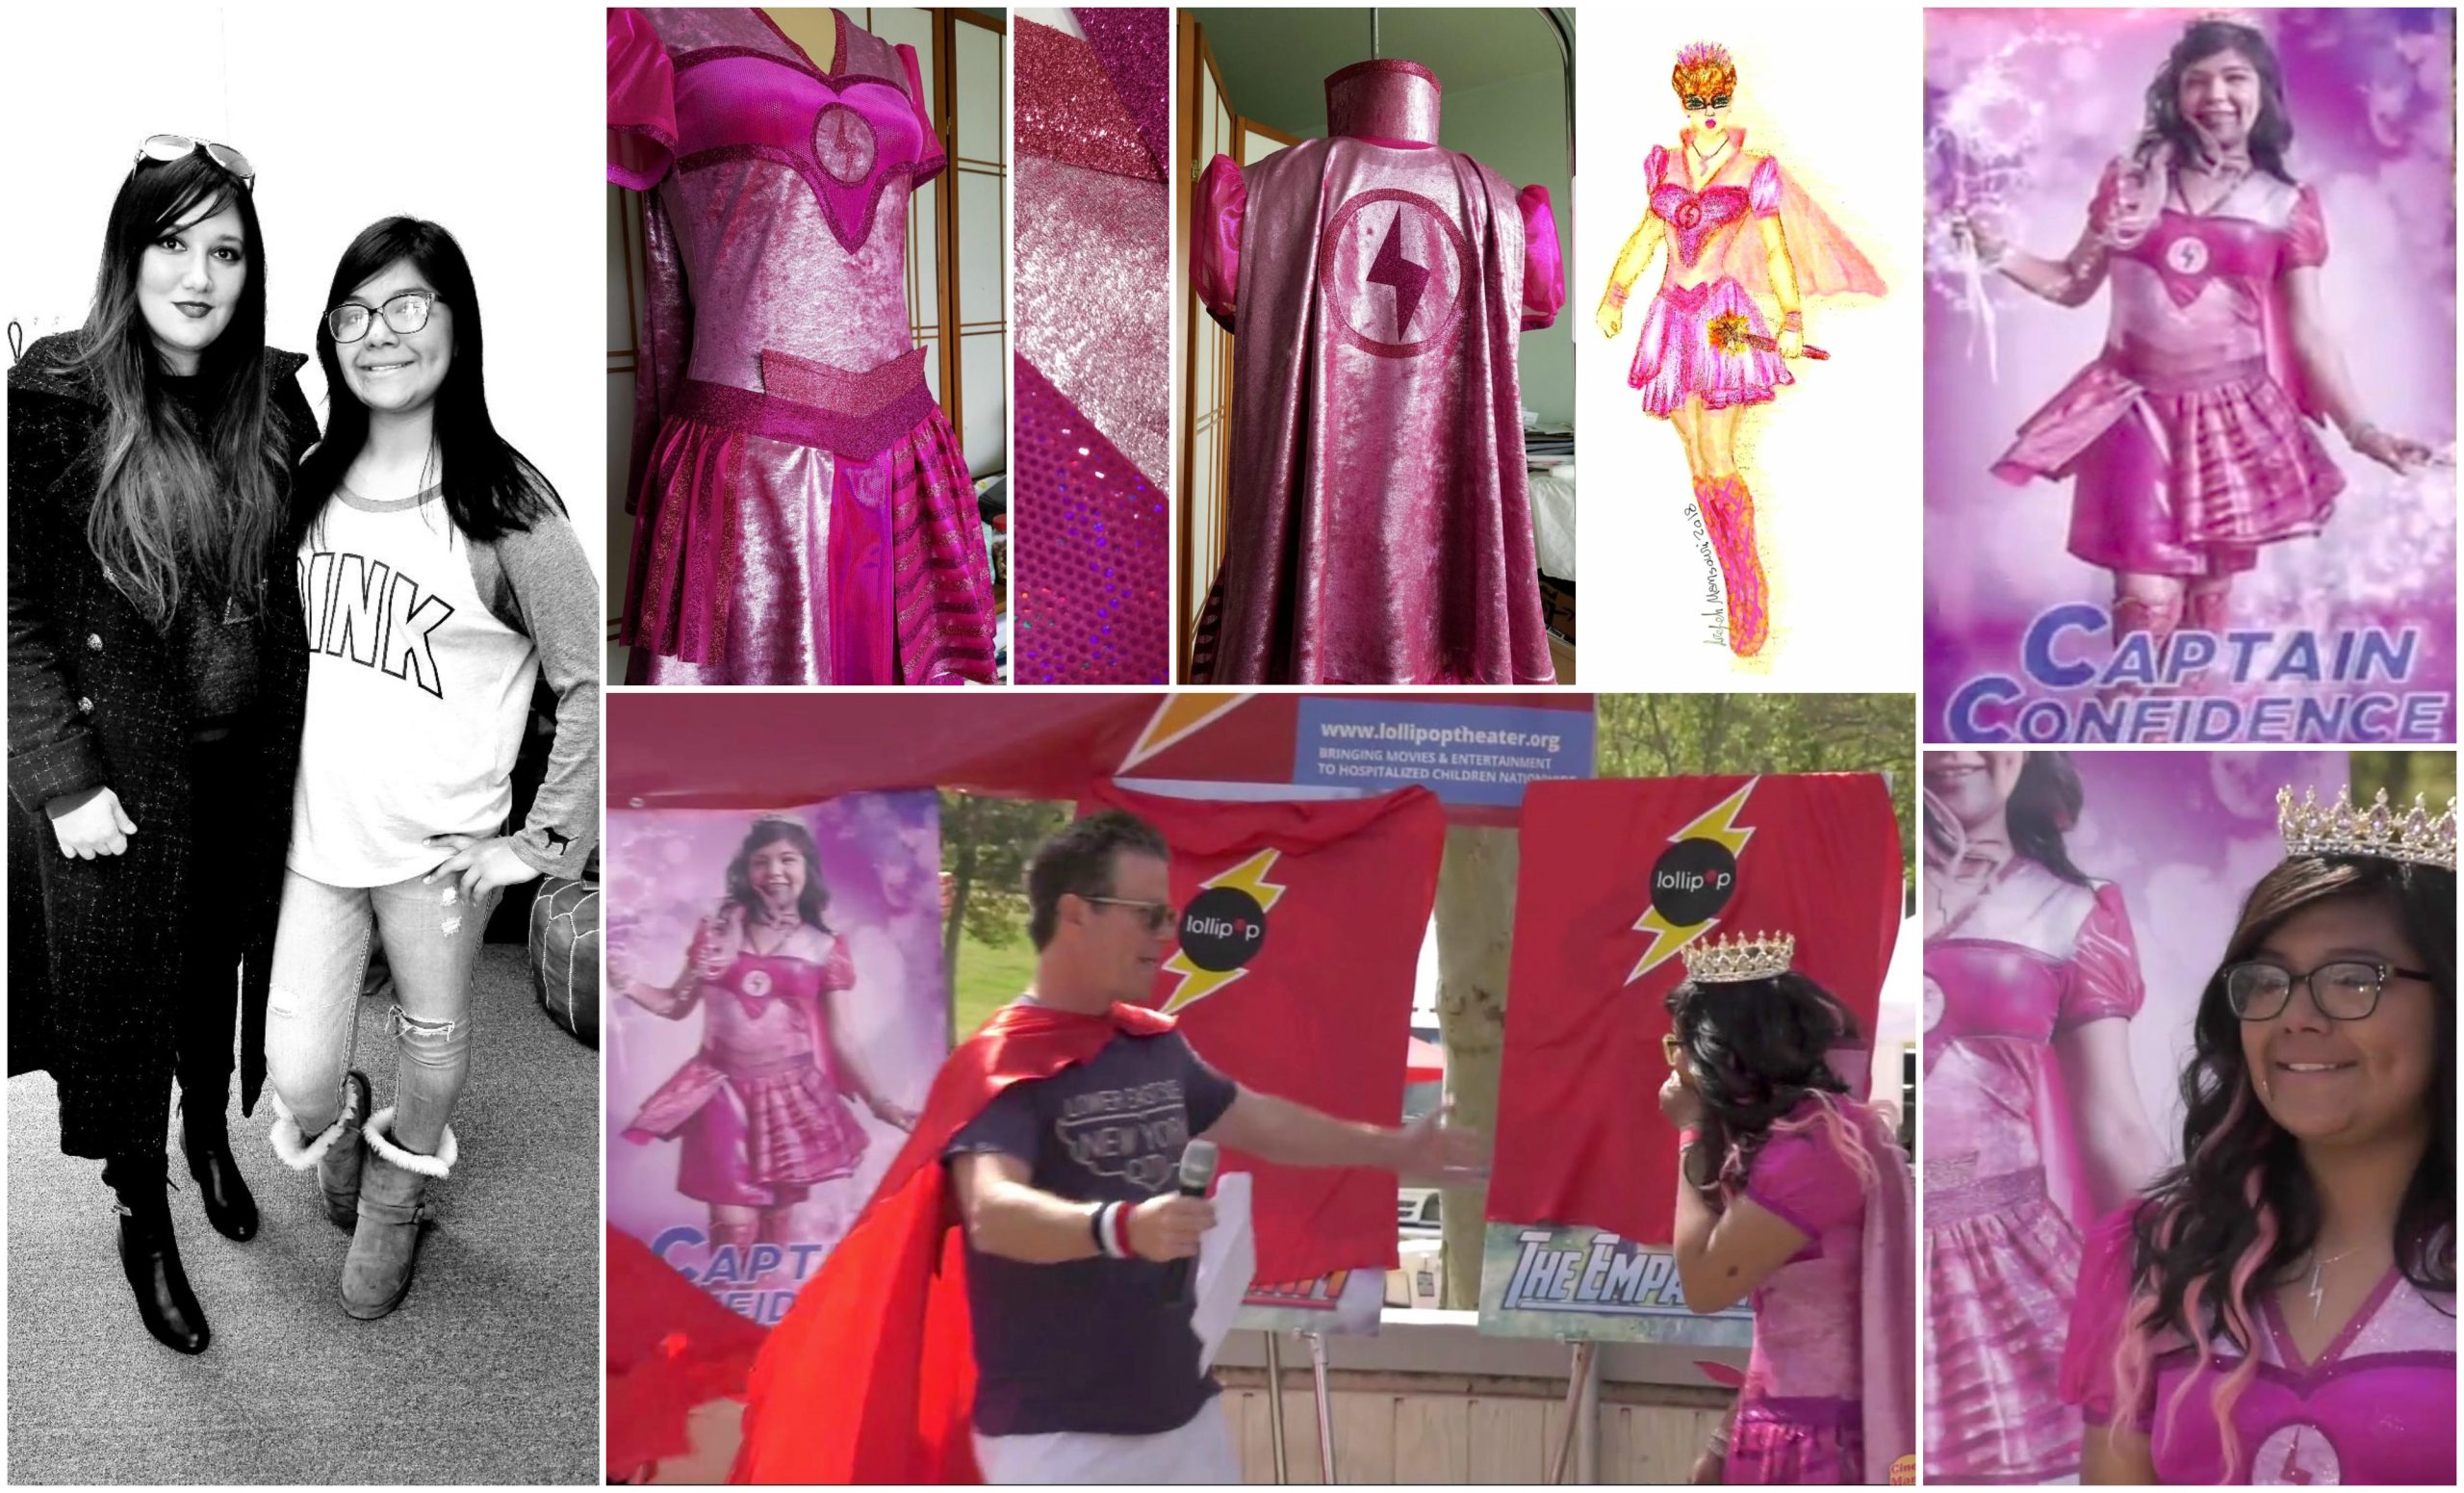 Costume-designer-Arefeh-Mansouri-collaborated-with-the-Lollipop-Theater-Network-to-create-a-costume-for-The-Superhero-Project.-